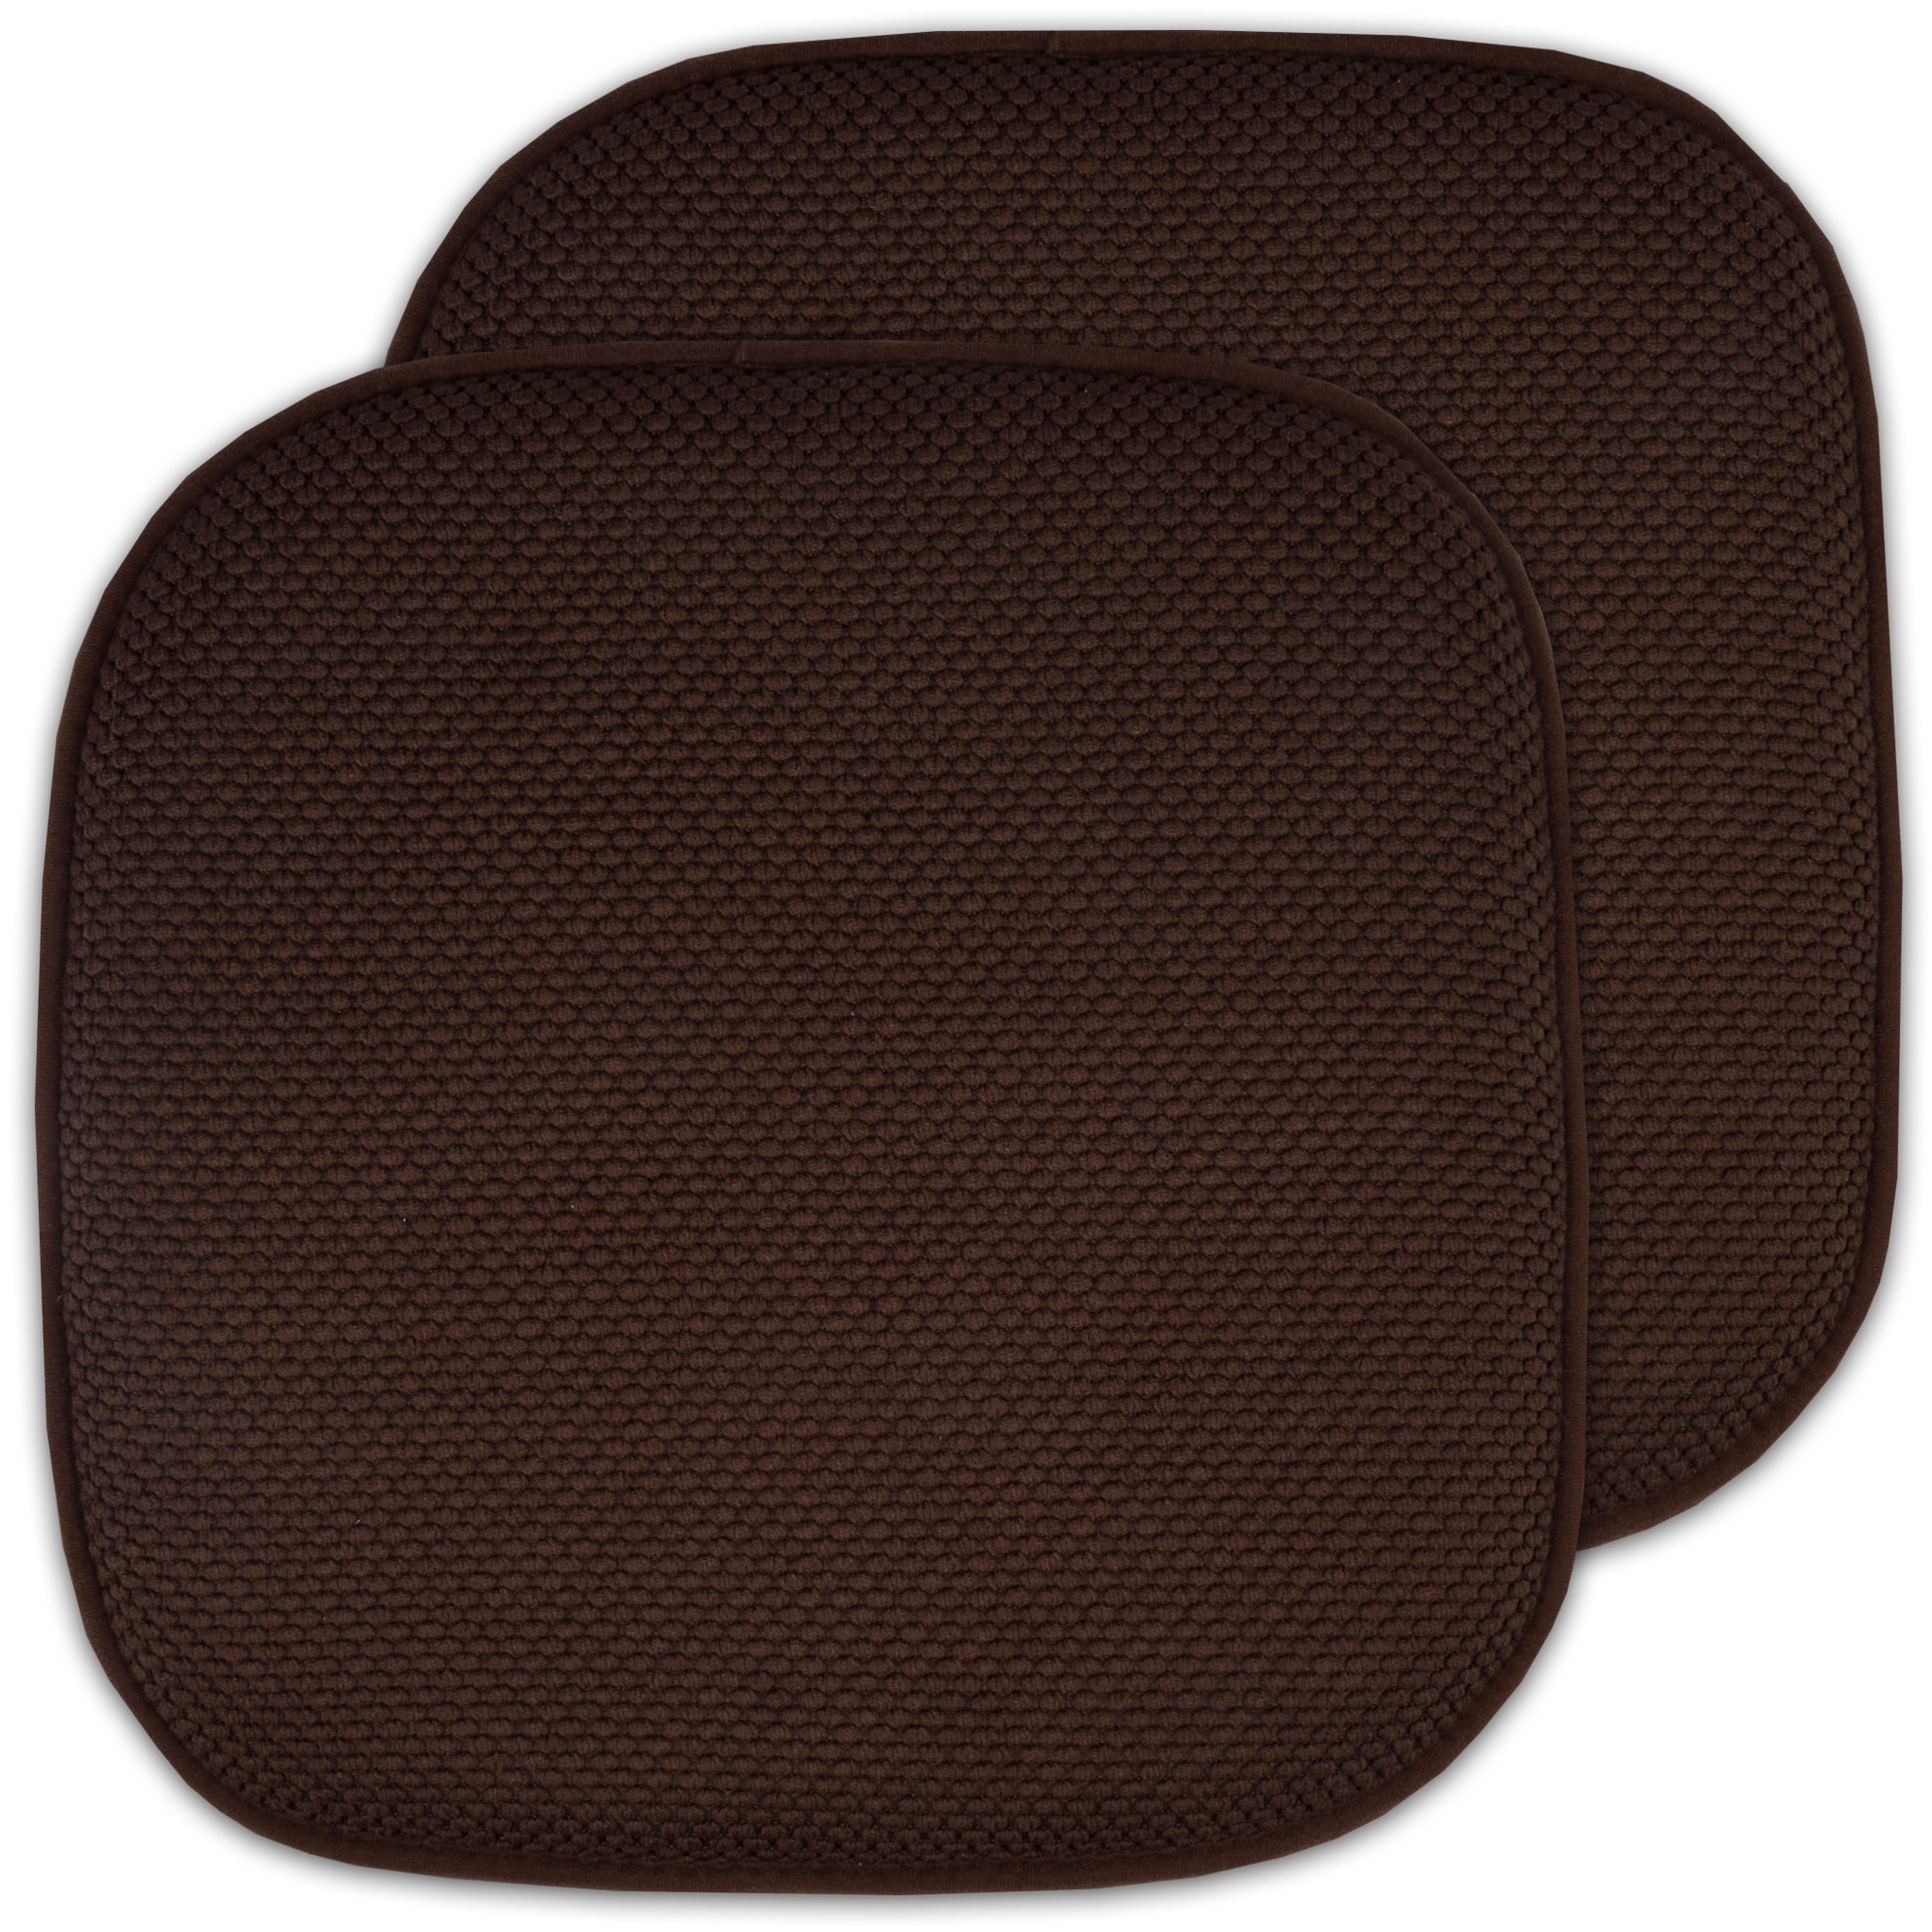 16 inchx16 inch Square Chair Pad Seat Cushion,with Ties Non-slip,Superior Comfort & Softness,Indoor Outdoor Sofa Chair Pads Cushion Pillow Pads for